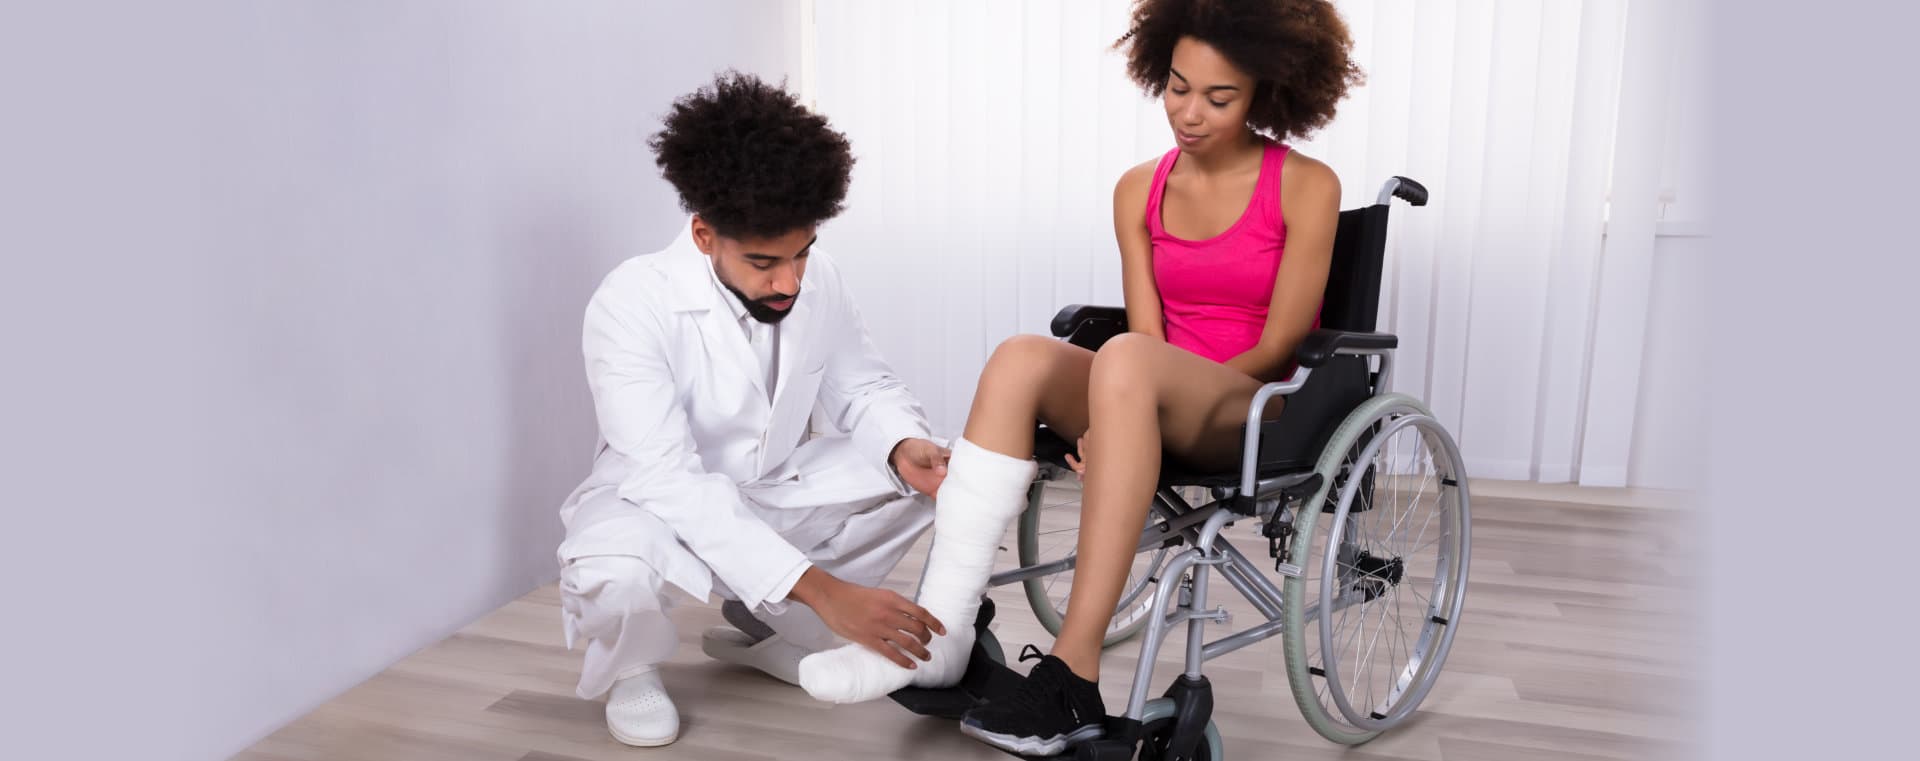 Male Physiotherapist Examining Leg Of Female Patient Sitting On Wheelchair